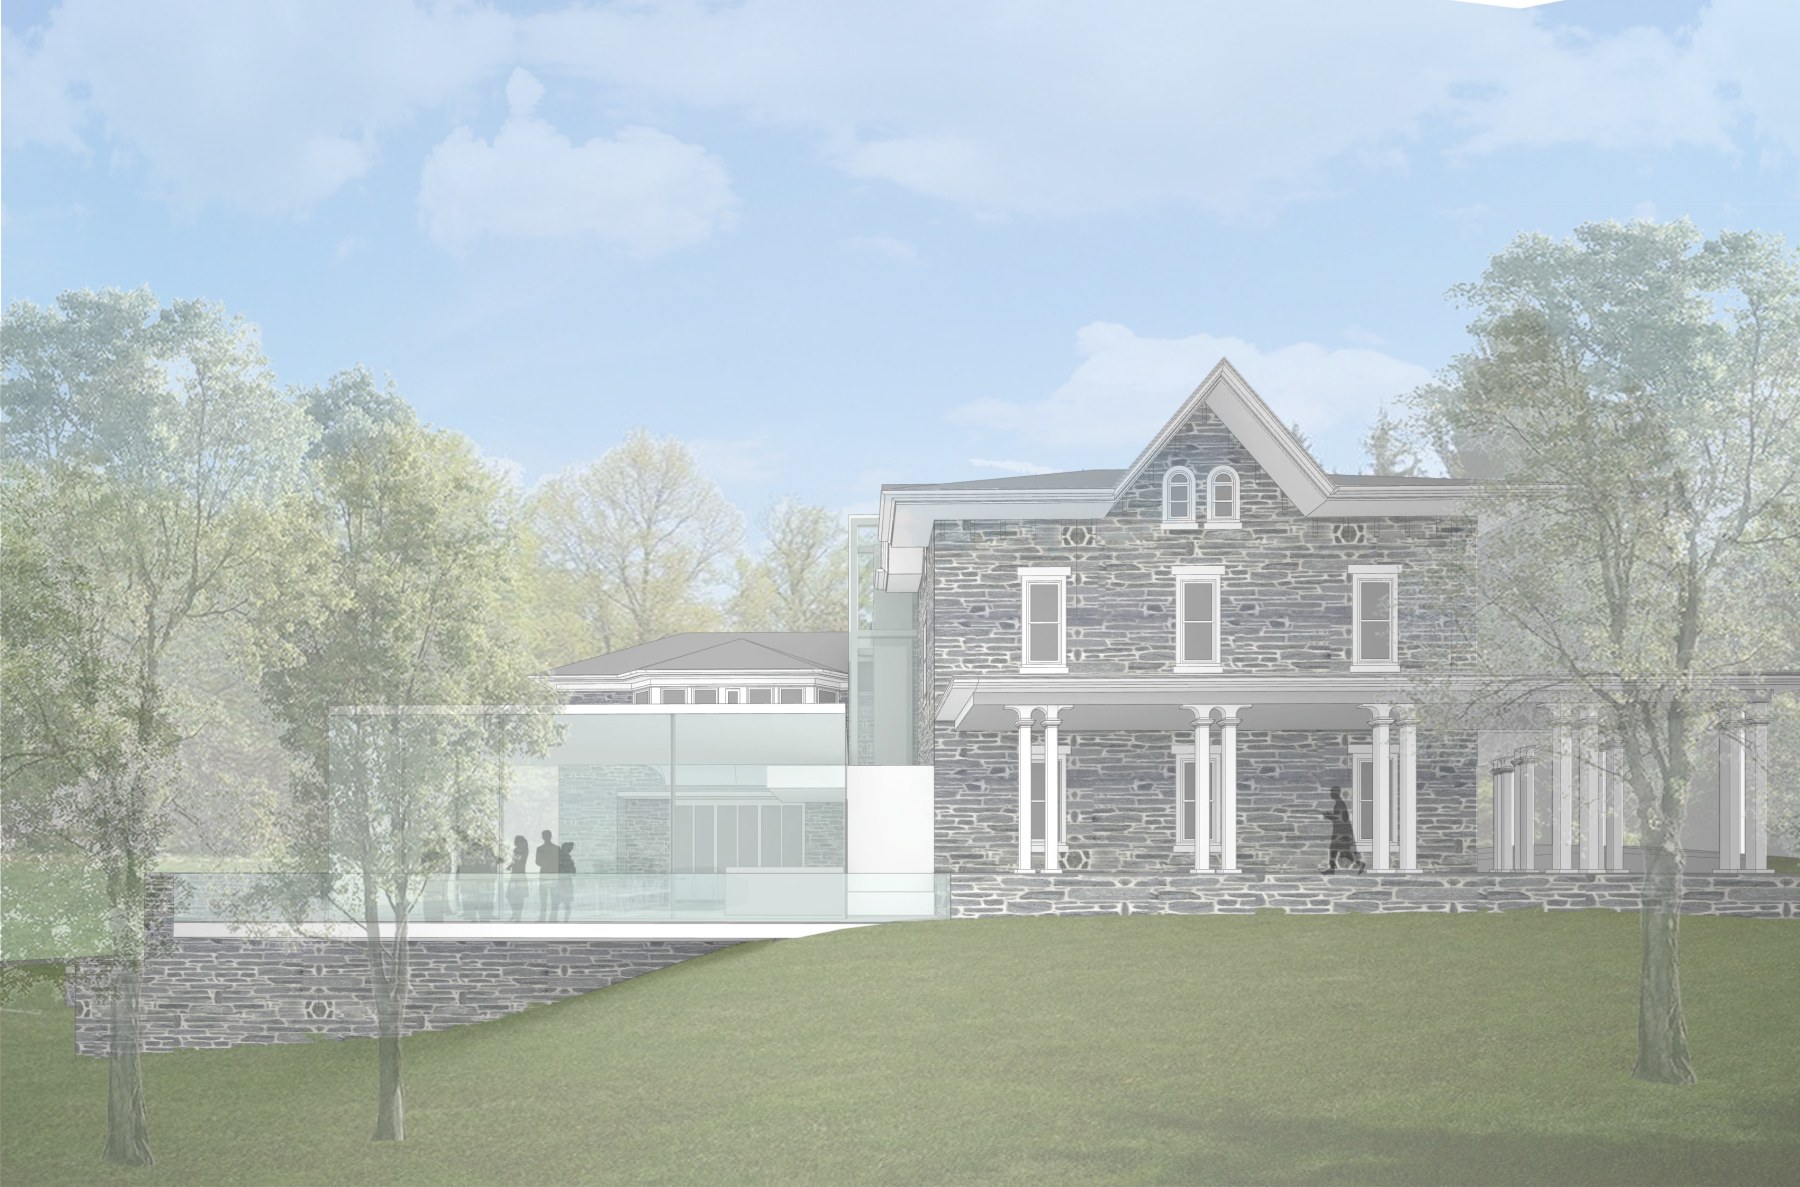 Woodmere Art Museum - Projects - Baird Architects